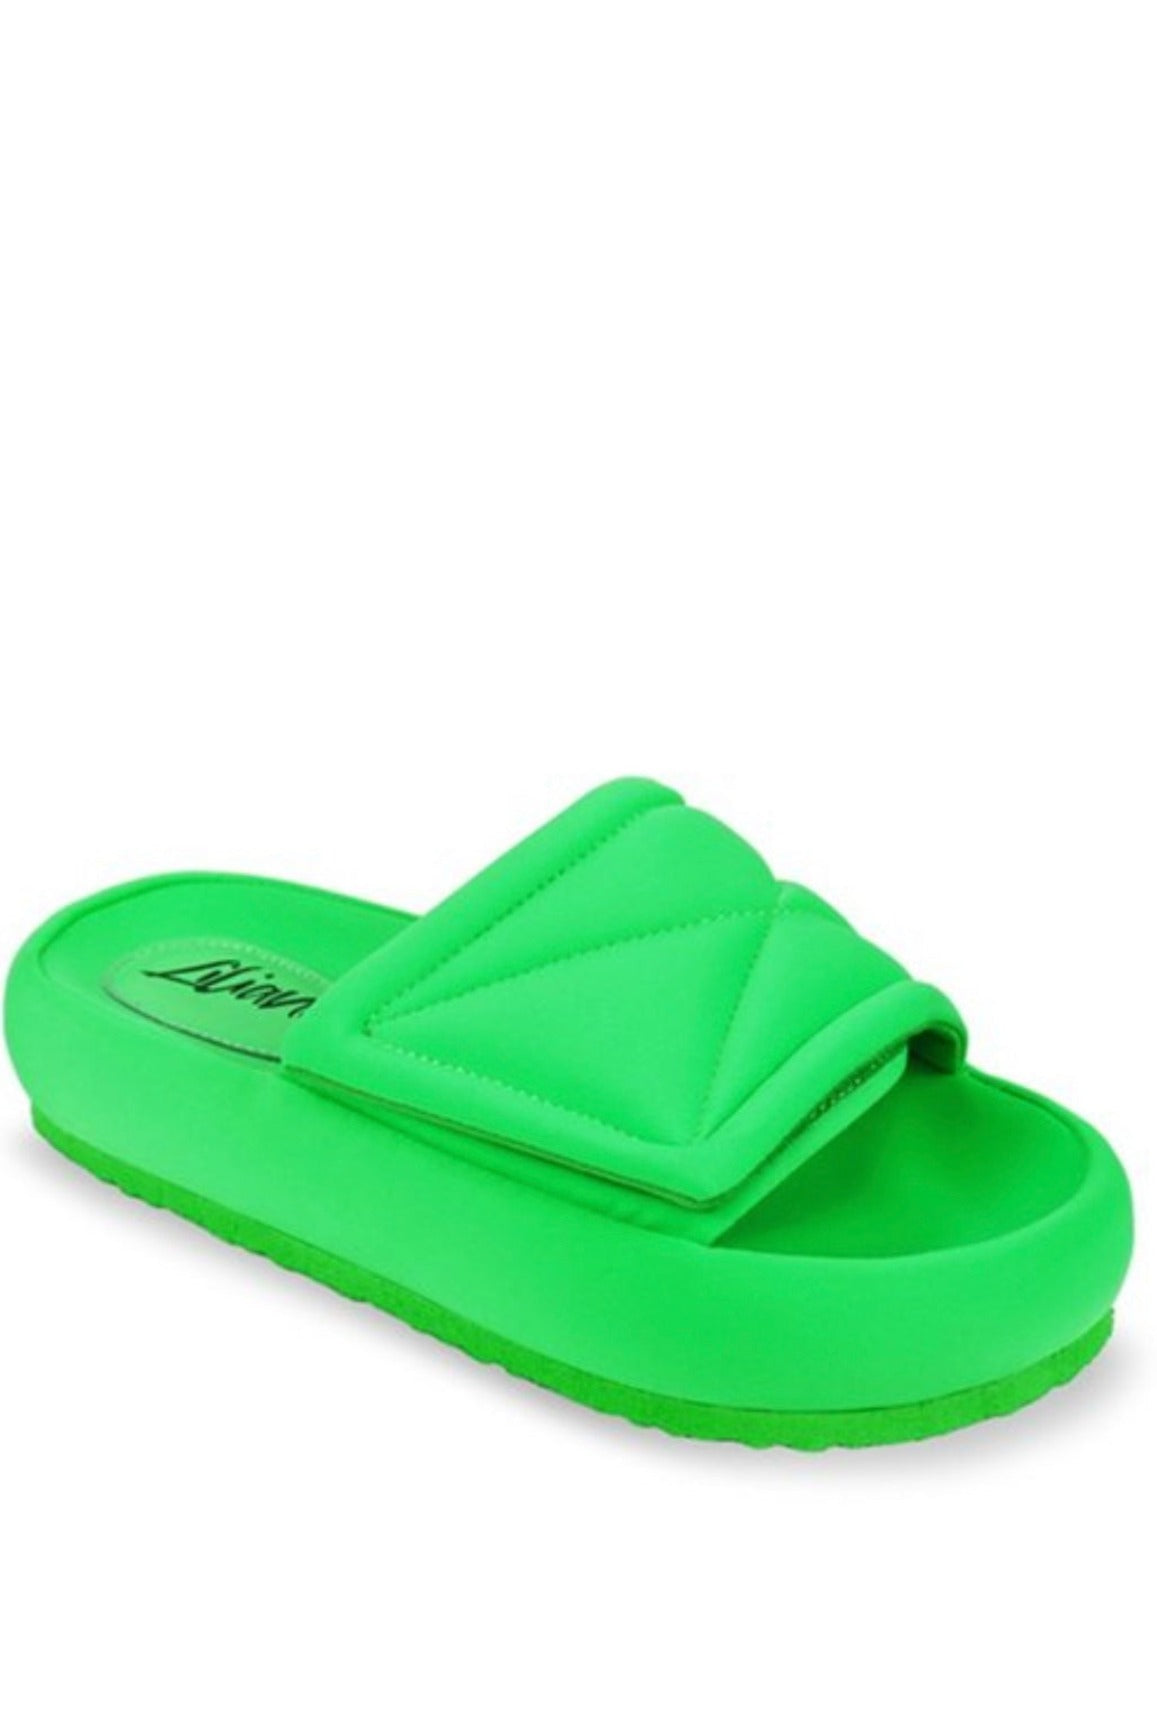 Puffie-1.....Velcro Thick Sole Sandal Slides Liliana Shoes